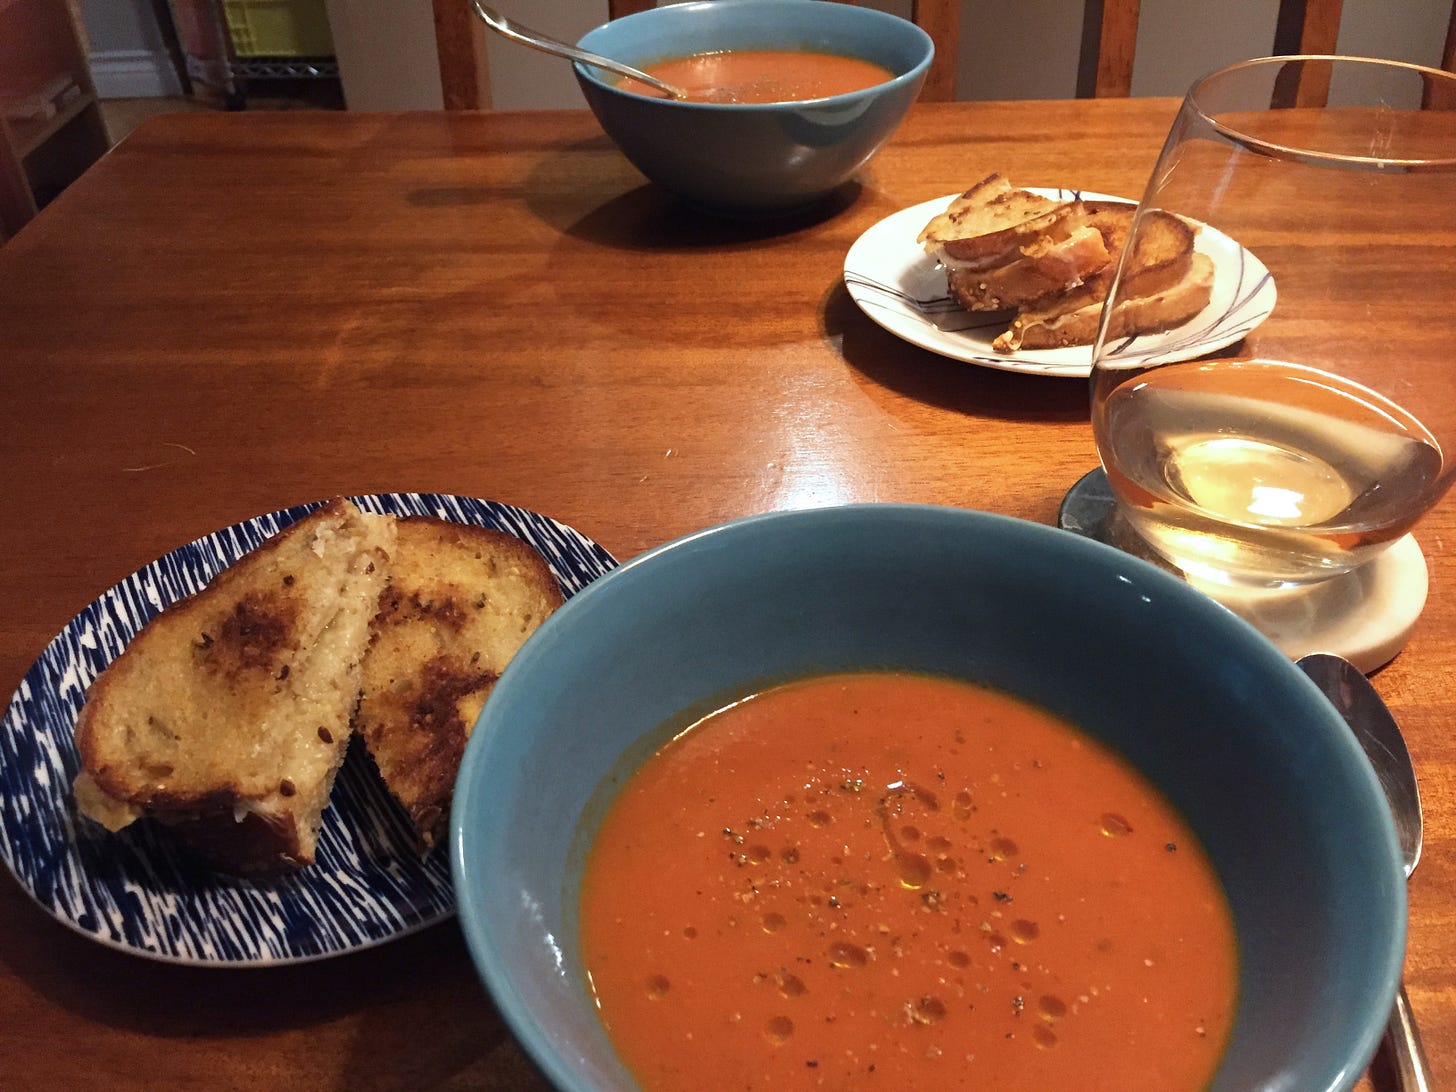 Two blue bowls of tomato soup with drizzles of olive oil and bits of thyme. Beside each of them is a small plate with a grilled cheese sandwich, and a glass of wine.